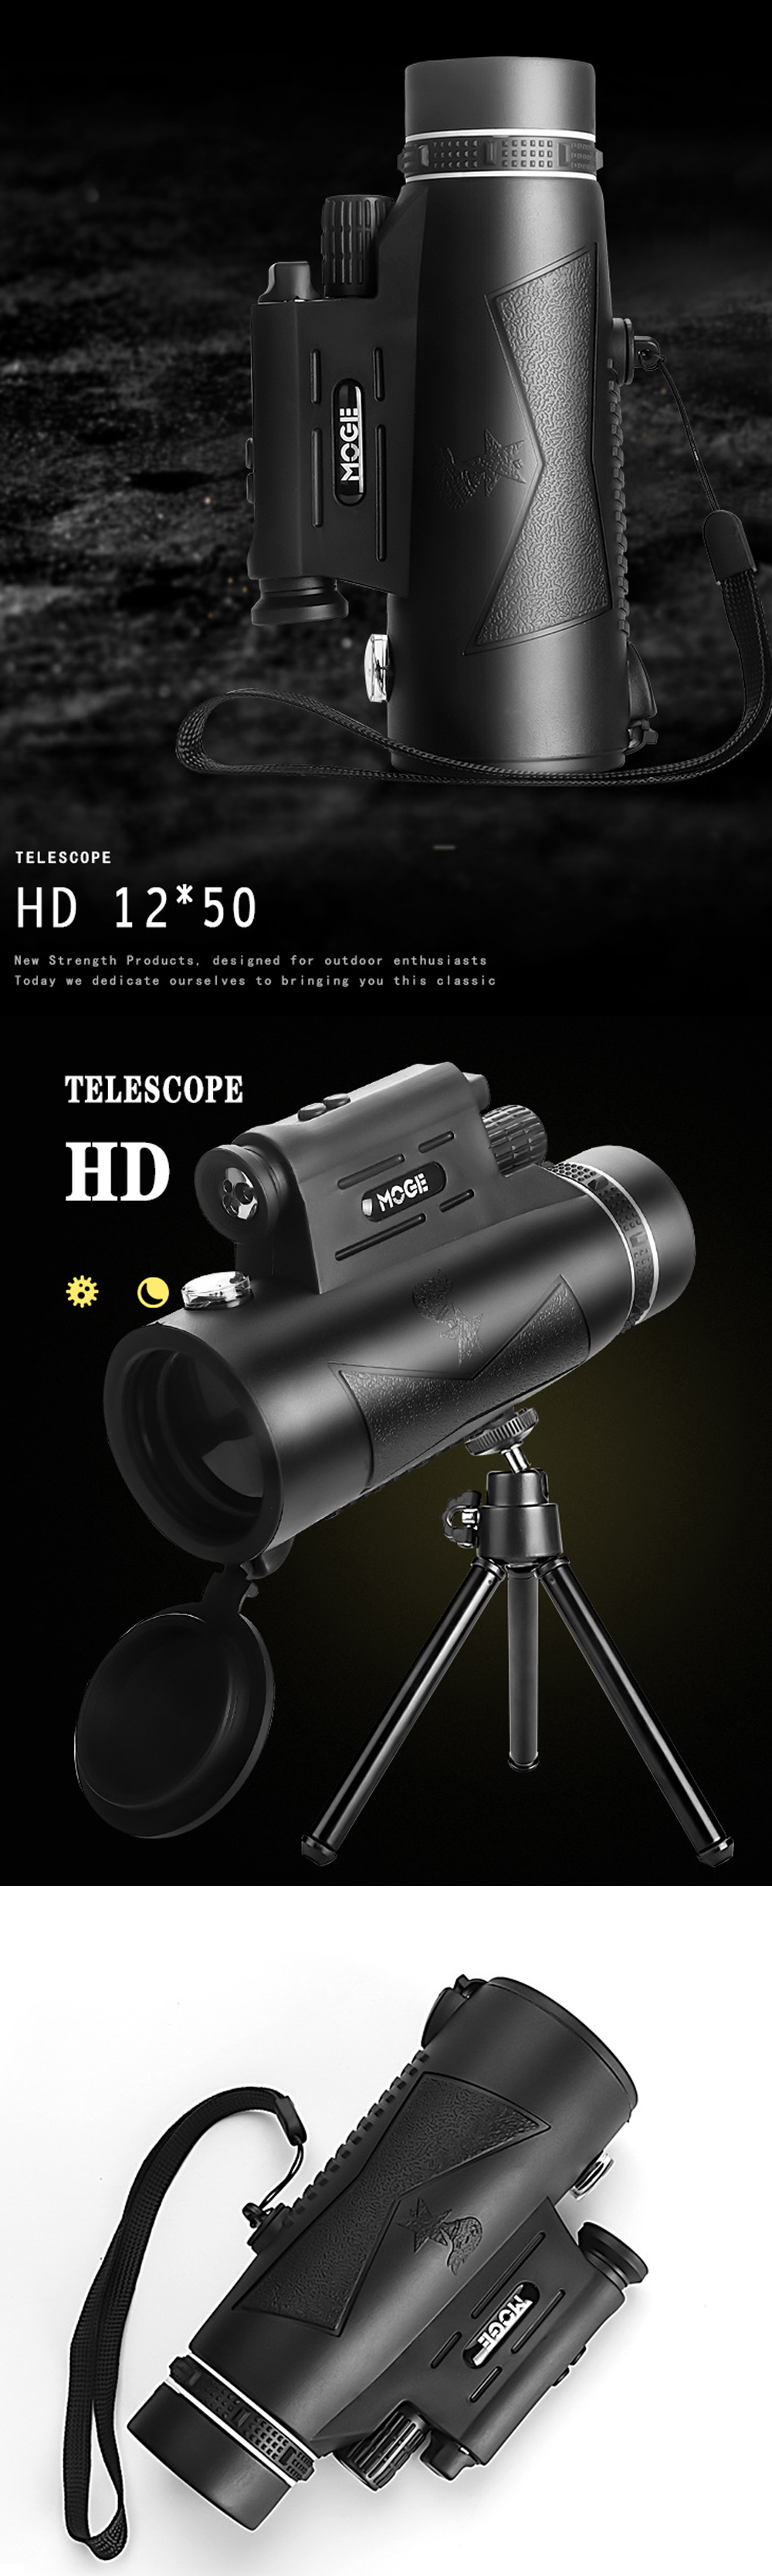 Moge-12X50-HD-Telescope-with-Laser-Flashlight-Phone-Adapter-Tripod-For-Outdoor-Camping-Travel-High-P-1838772-3